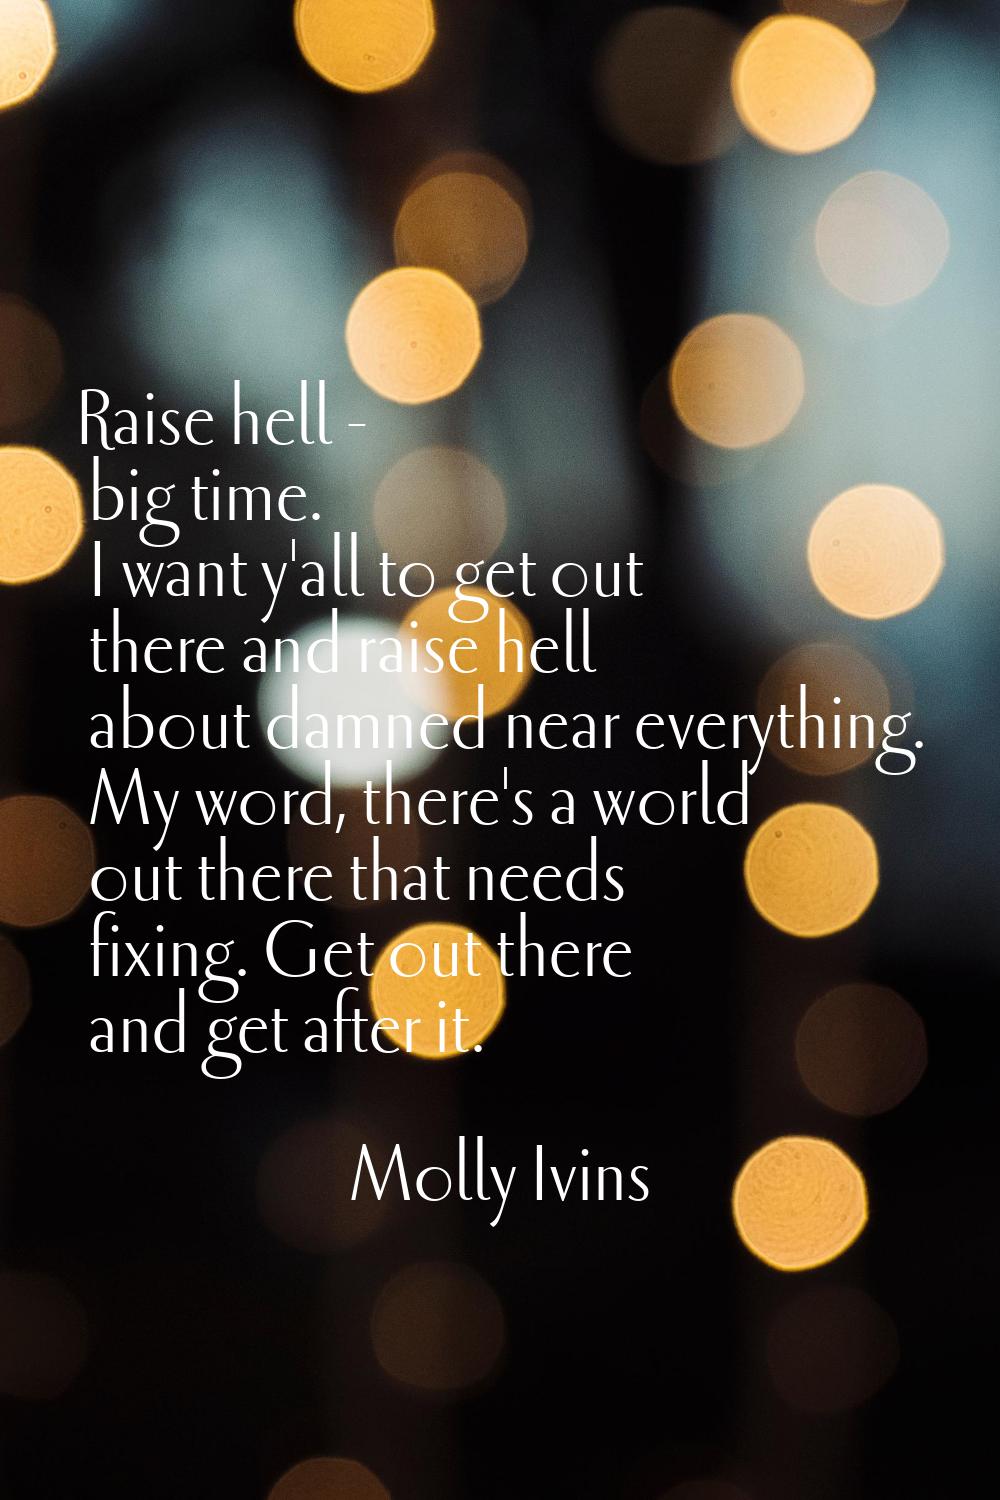 Raise hell - big time. I want y'all to get out there and raise hell about damned near everything. M